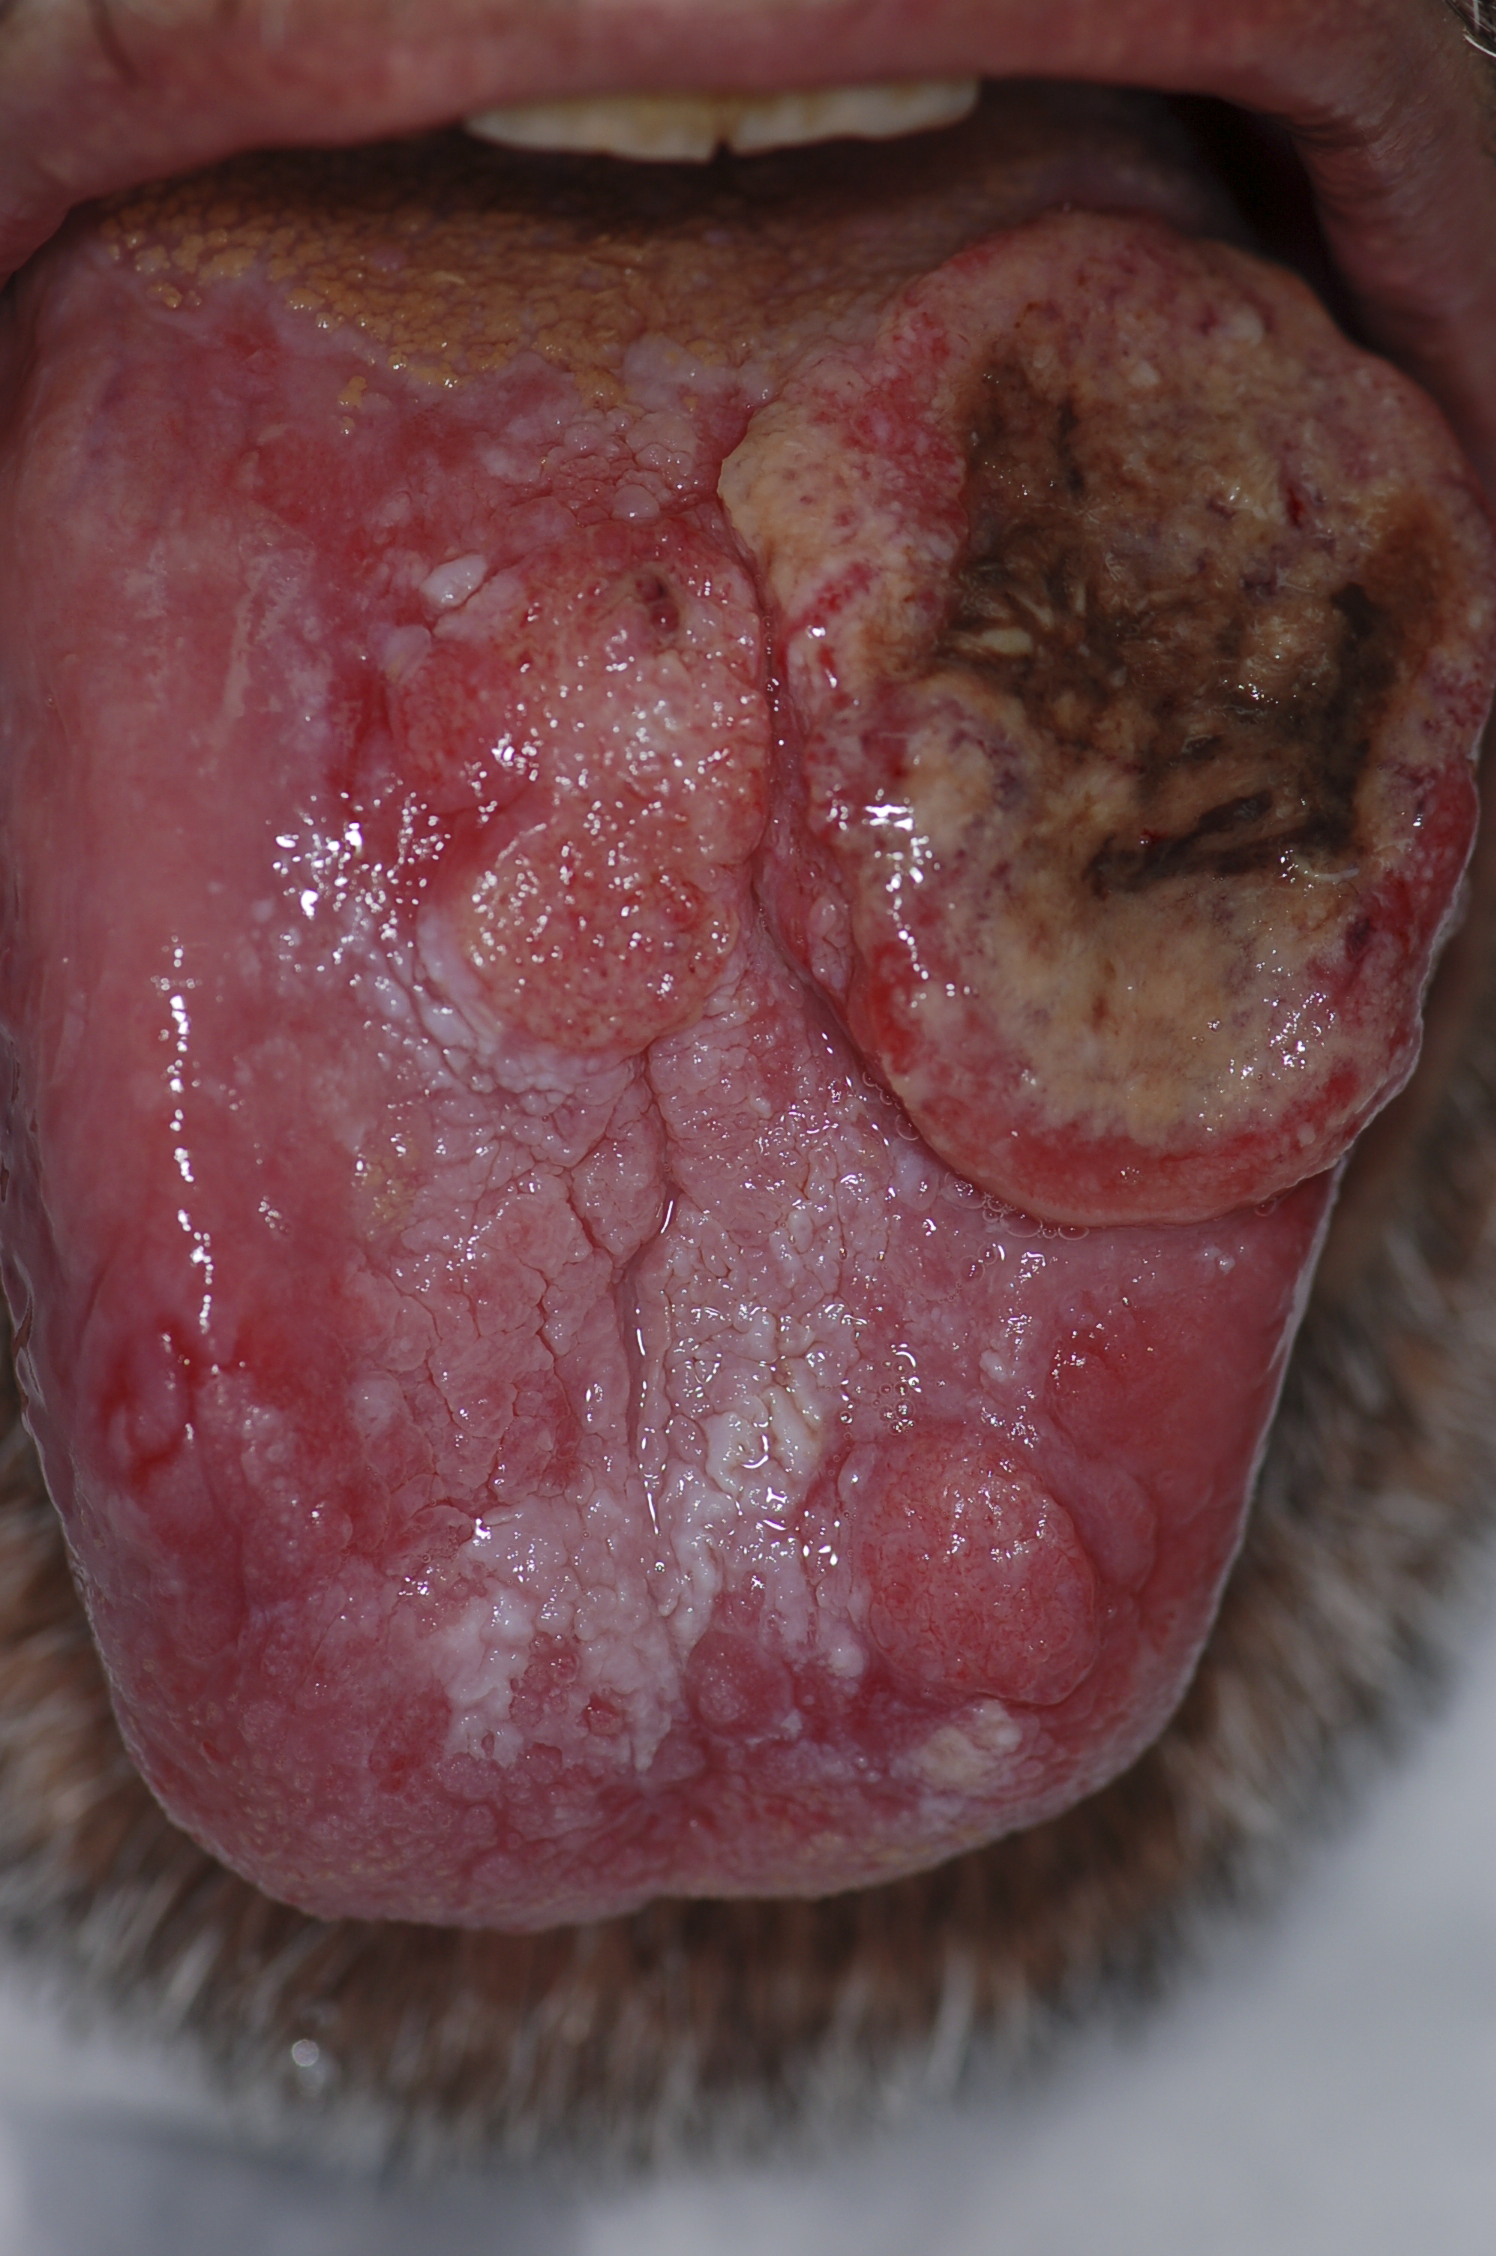 thumb, Gross pathology of oral SCC, source: By Luca Pastore, Maria Luisa Fiorella, Raffaele Fiorella, Lorenzo Lo Muzio - http://www.plosmedicine.org/article/showImageLarge.action?uri=info%3Adoi%2F10.1371%2Fjournal.pmed.0050212.g001, CC BY 2.5, https://commons.wikimedia.org/w/index.php?curid=15252632